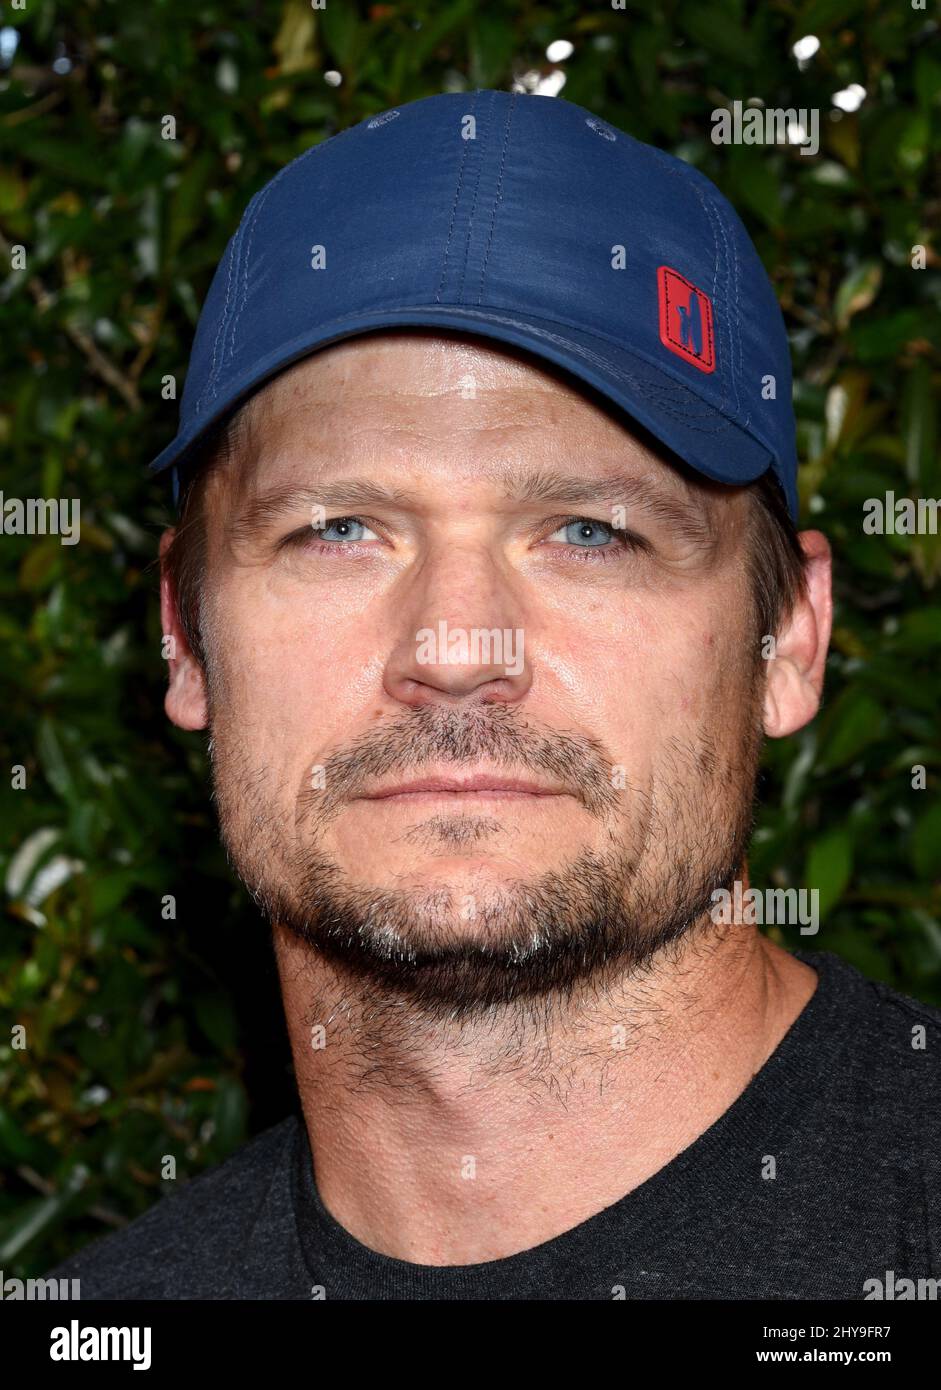 Bailey Chase John Varvatos 13th Annual Stuart House Benefit held at the John Varvatos Boutique Stock Photo